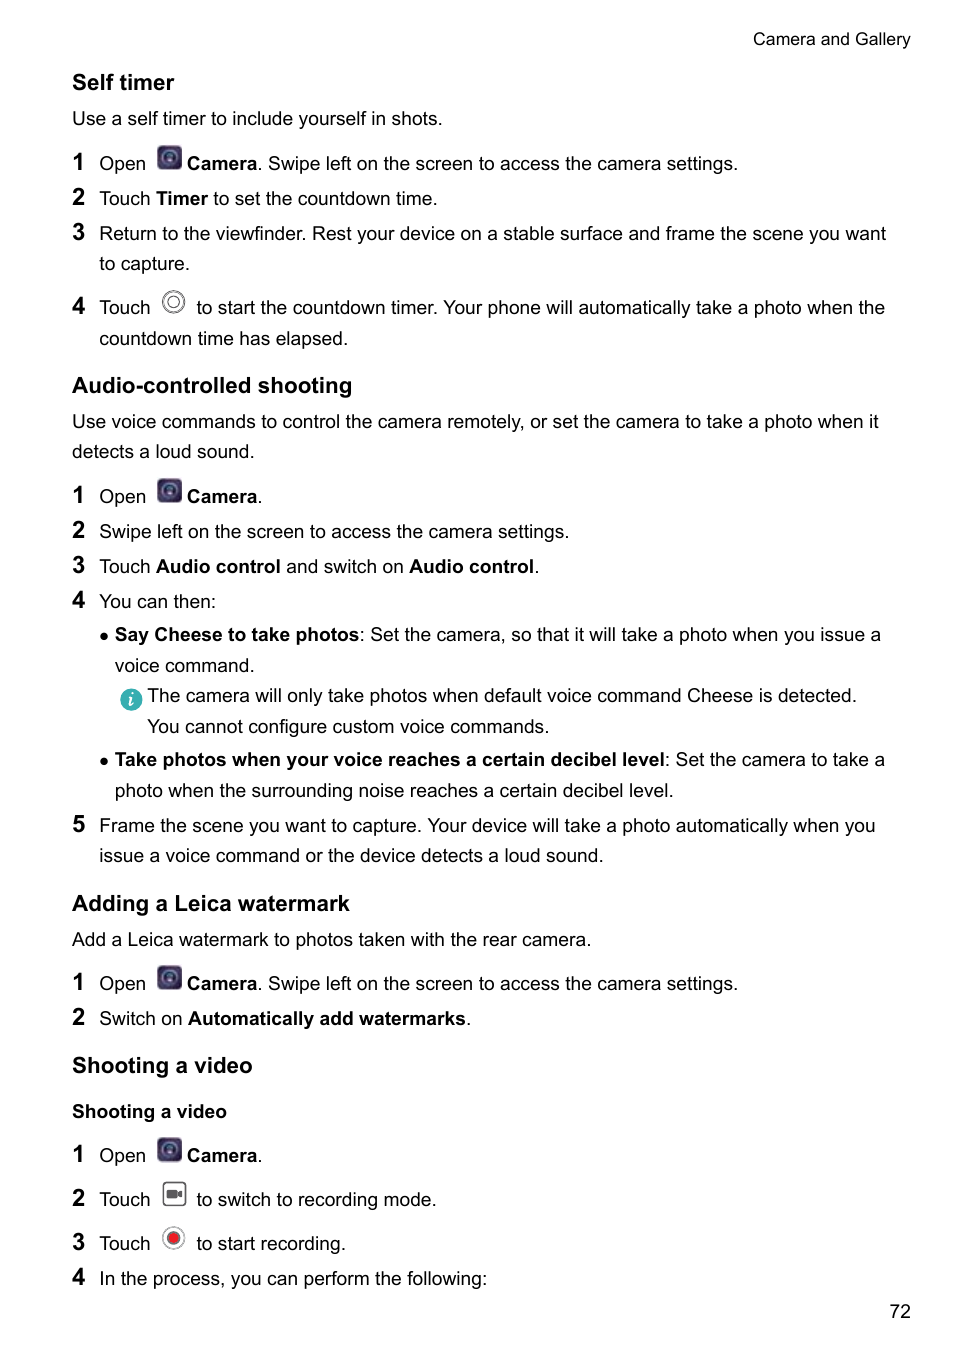 Self timer, Audio-controlled shooting, Adding a leica watermark | Huawei P10  User Manual | Page 78 / 158